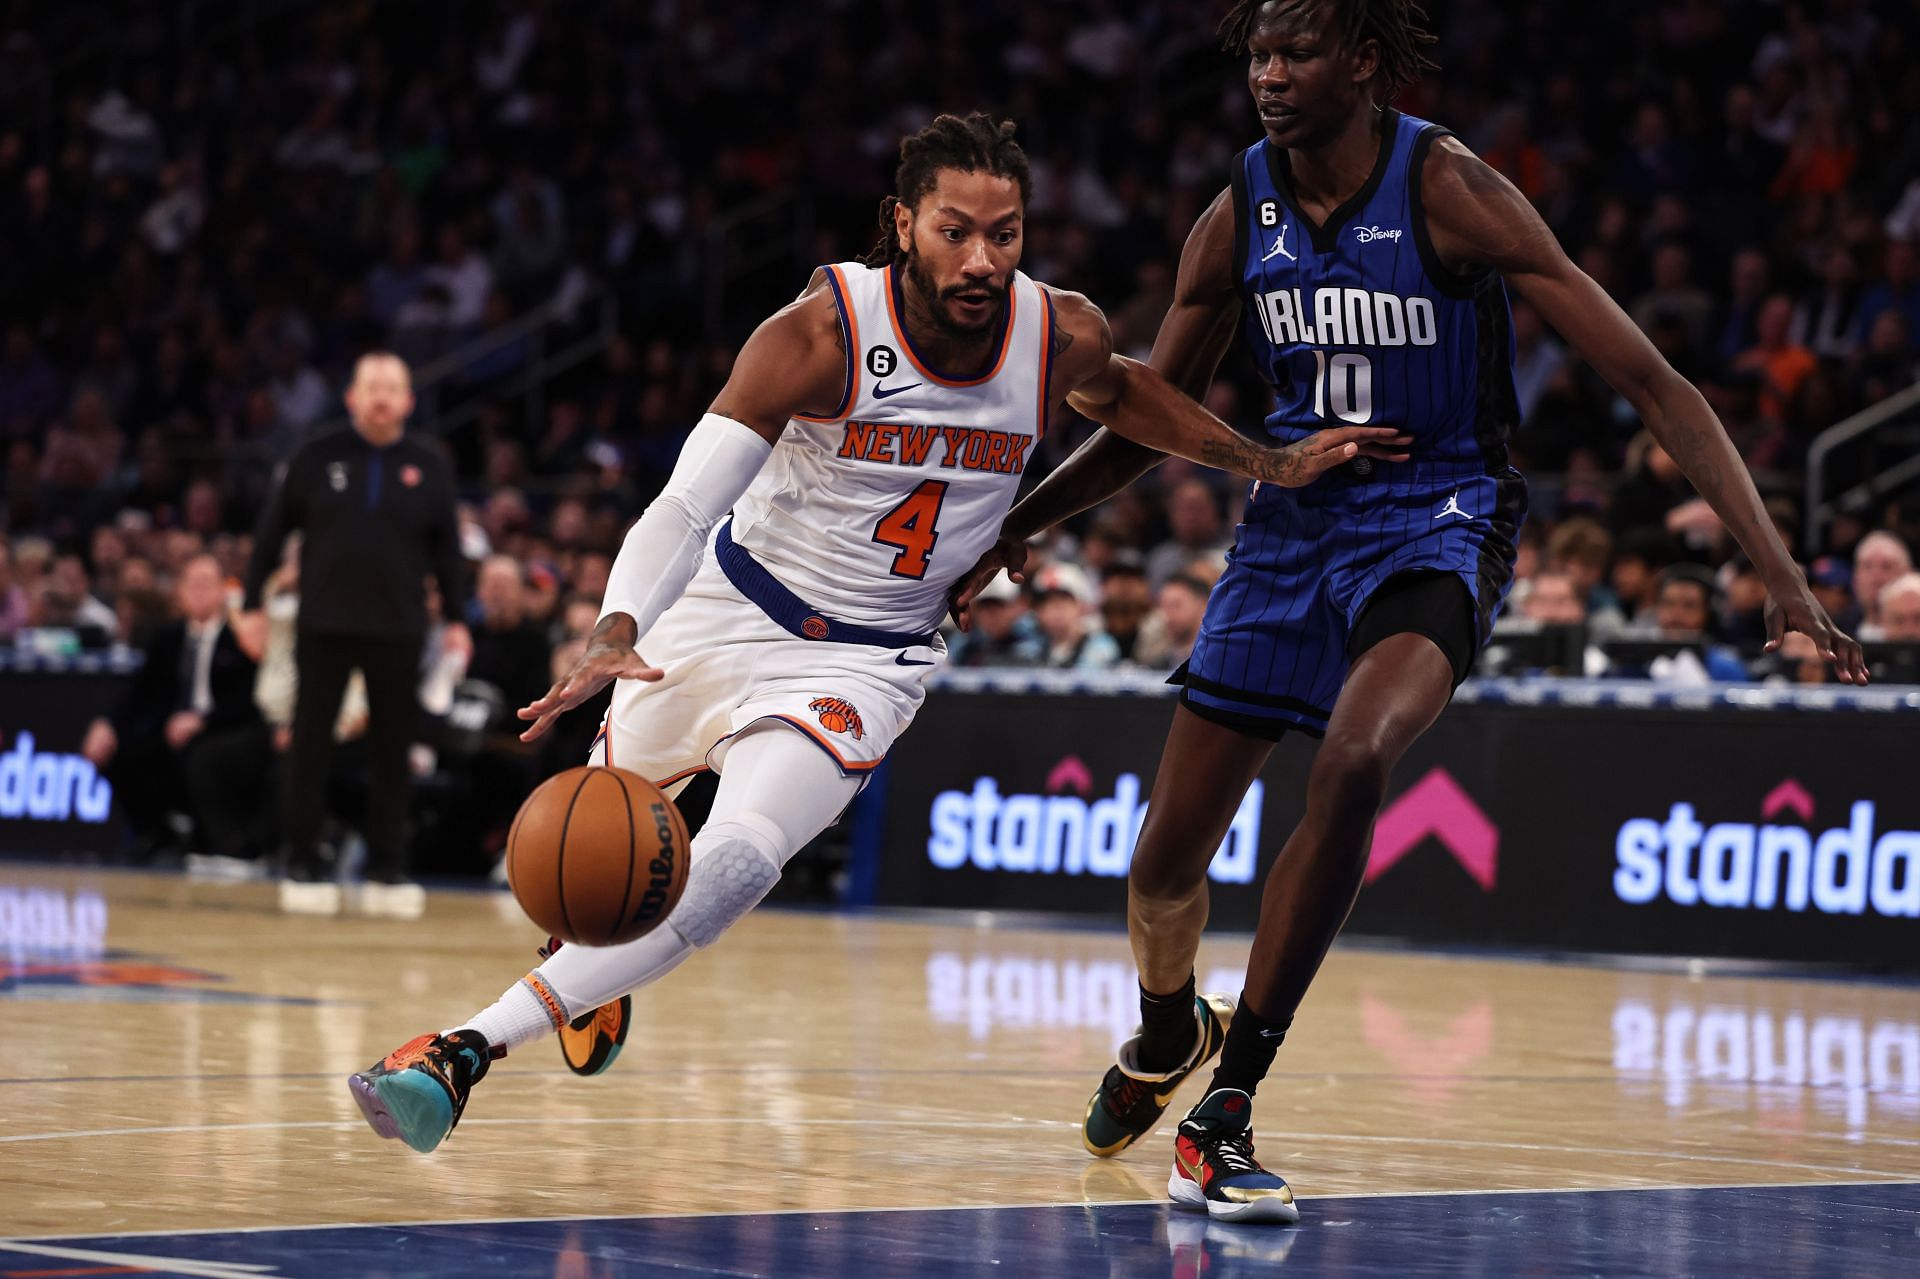 Derrick Rose of the New York Knicks is defended by Bol Bol of the Orlando Magic